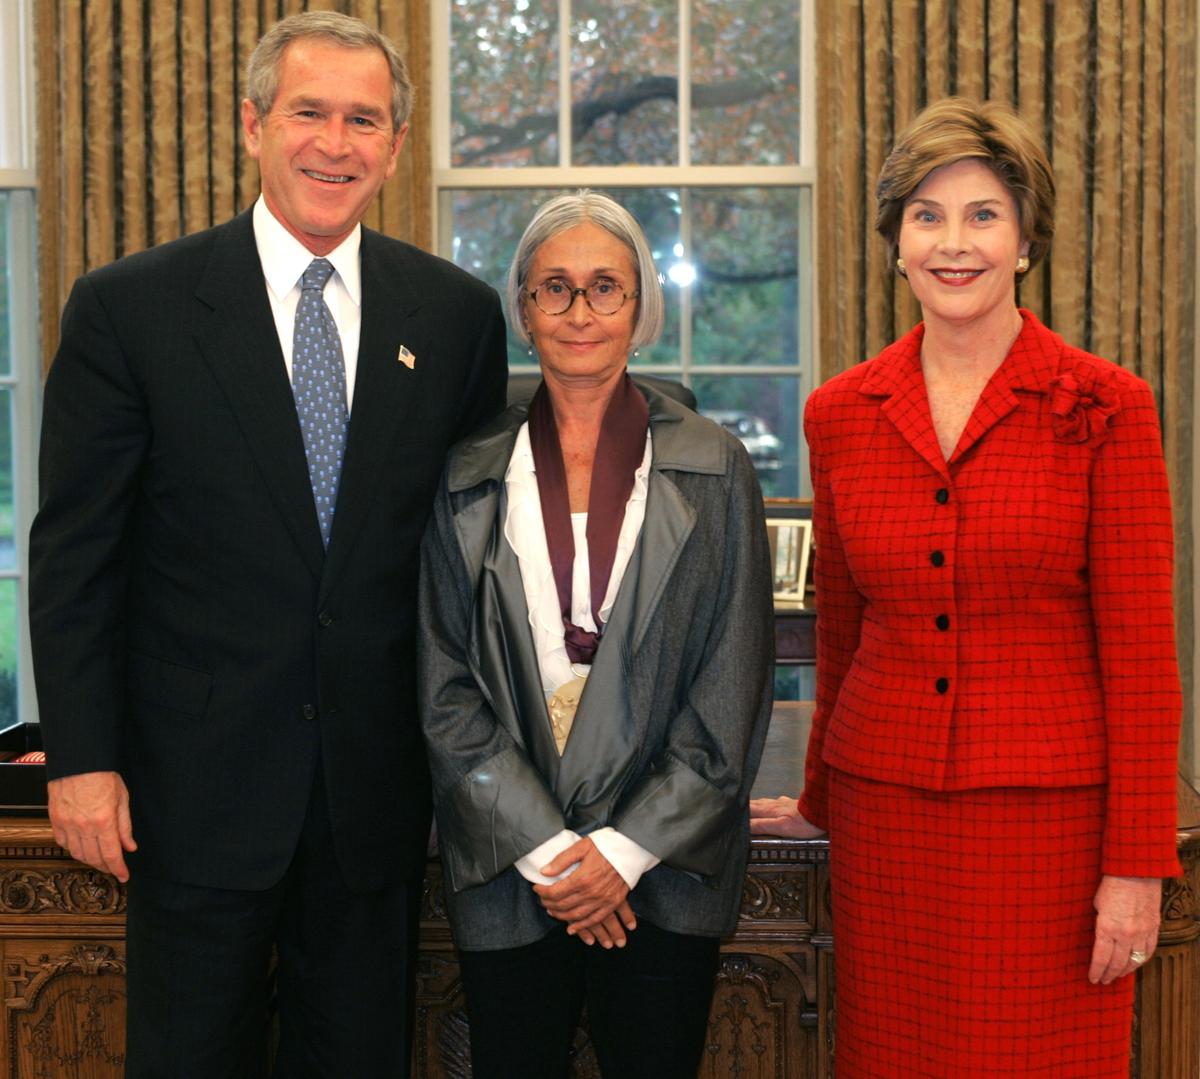 President George W. Bush and Laura Bush present the National Medal of Arts award to choreographer Twyla Tharp White House photo by Susan Sterner